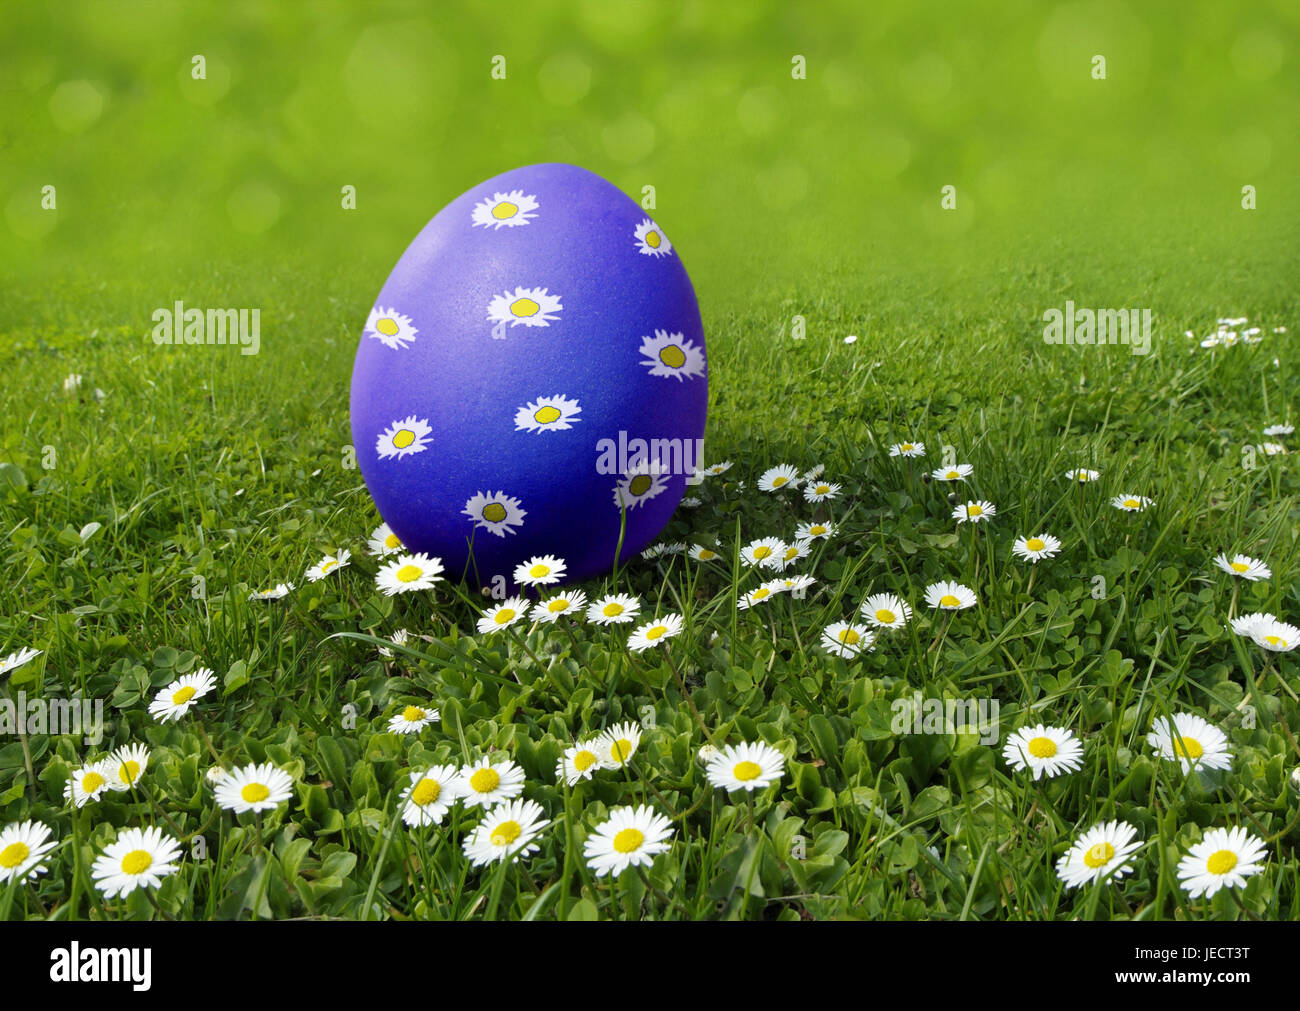 Easter, meadow, daisy, Easter egg, blue, paints, blossoms, egg search, [M], grass, flower meadow, spring meadow, flowers, little flowers, culture, feast, Easter feast, Easter time, Easter traditions, tradition, österlich, egg, Hühnerei, one, individually, tintedly, brightly, sample, flowers, little flowers, Blümchenmuster, sweetly, Easter motif, season, icon, spring, Easter Sunday, childhood, Easter egg hunt, Easter hiding place, Stock Photo